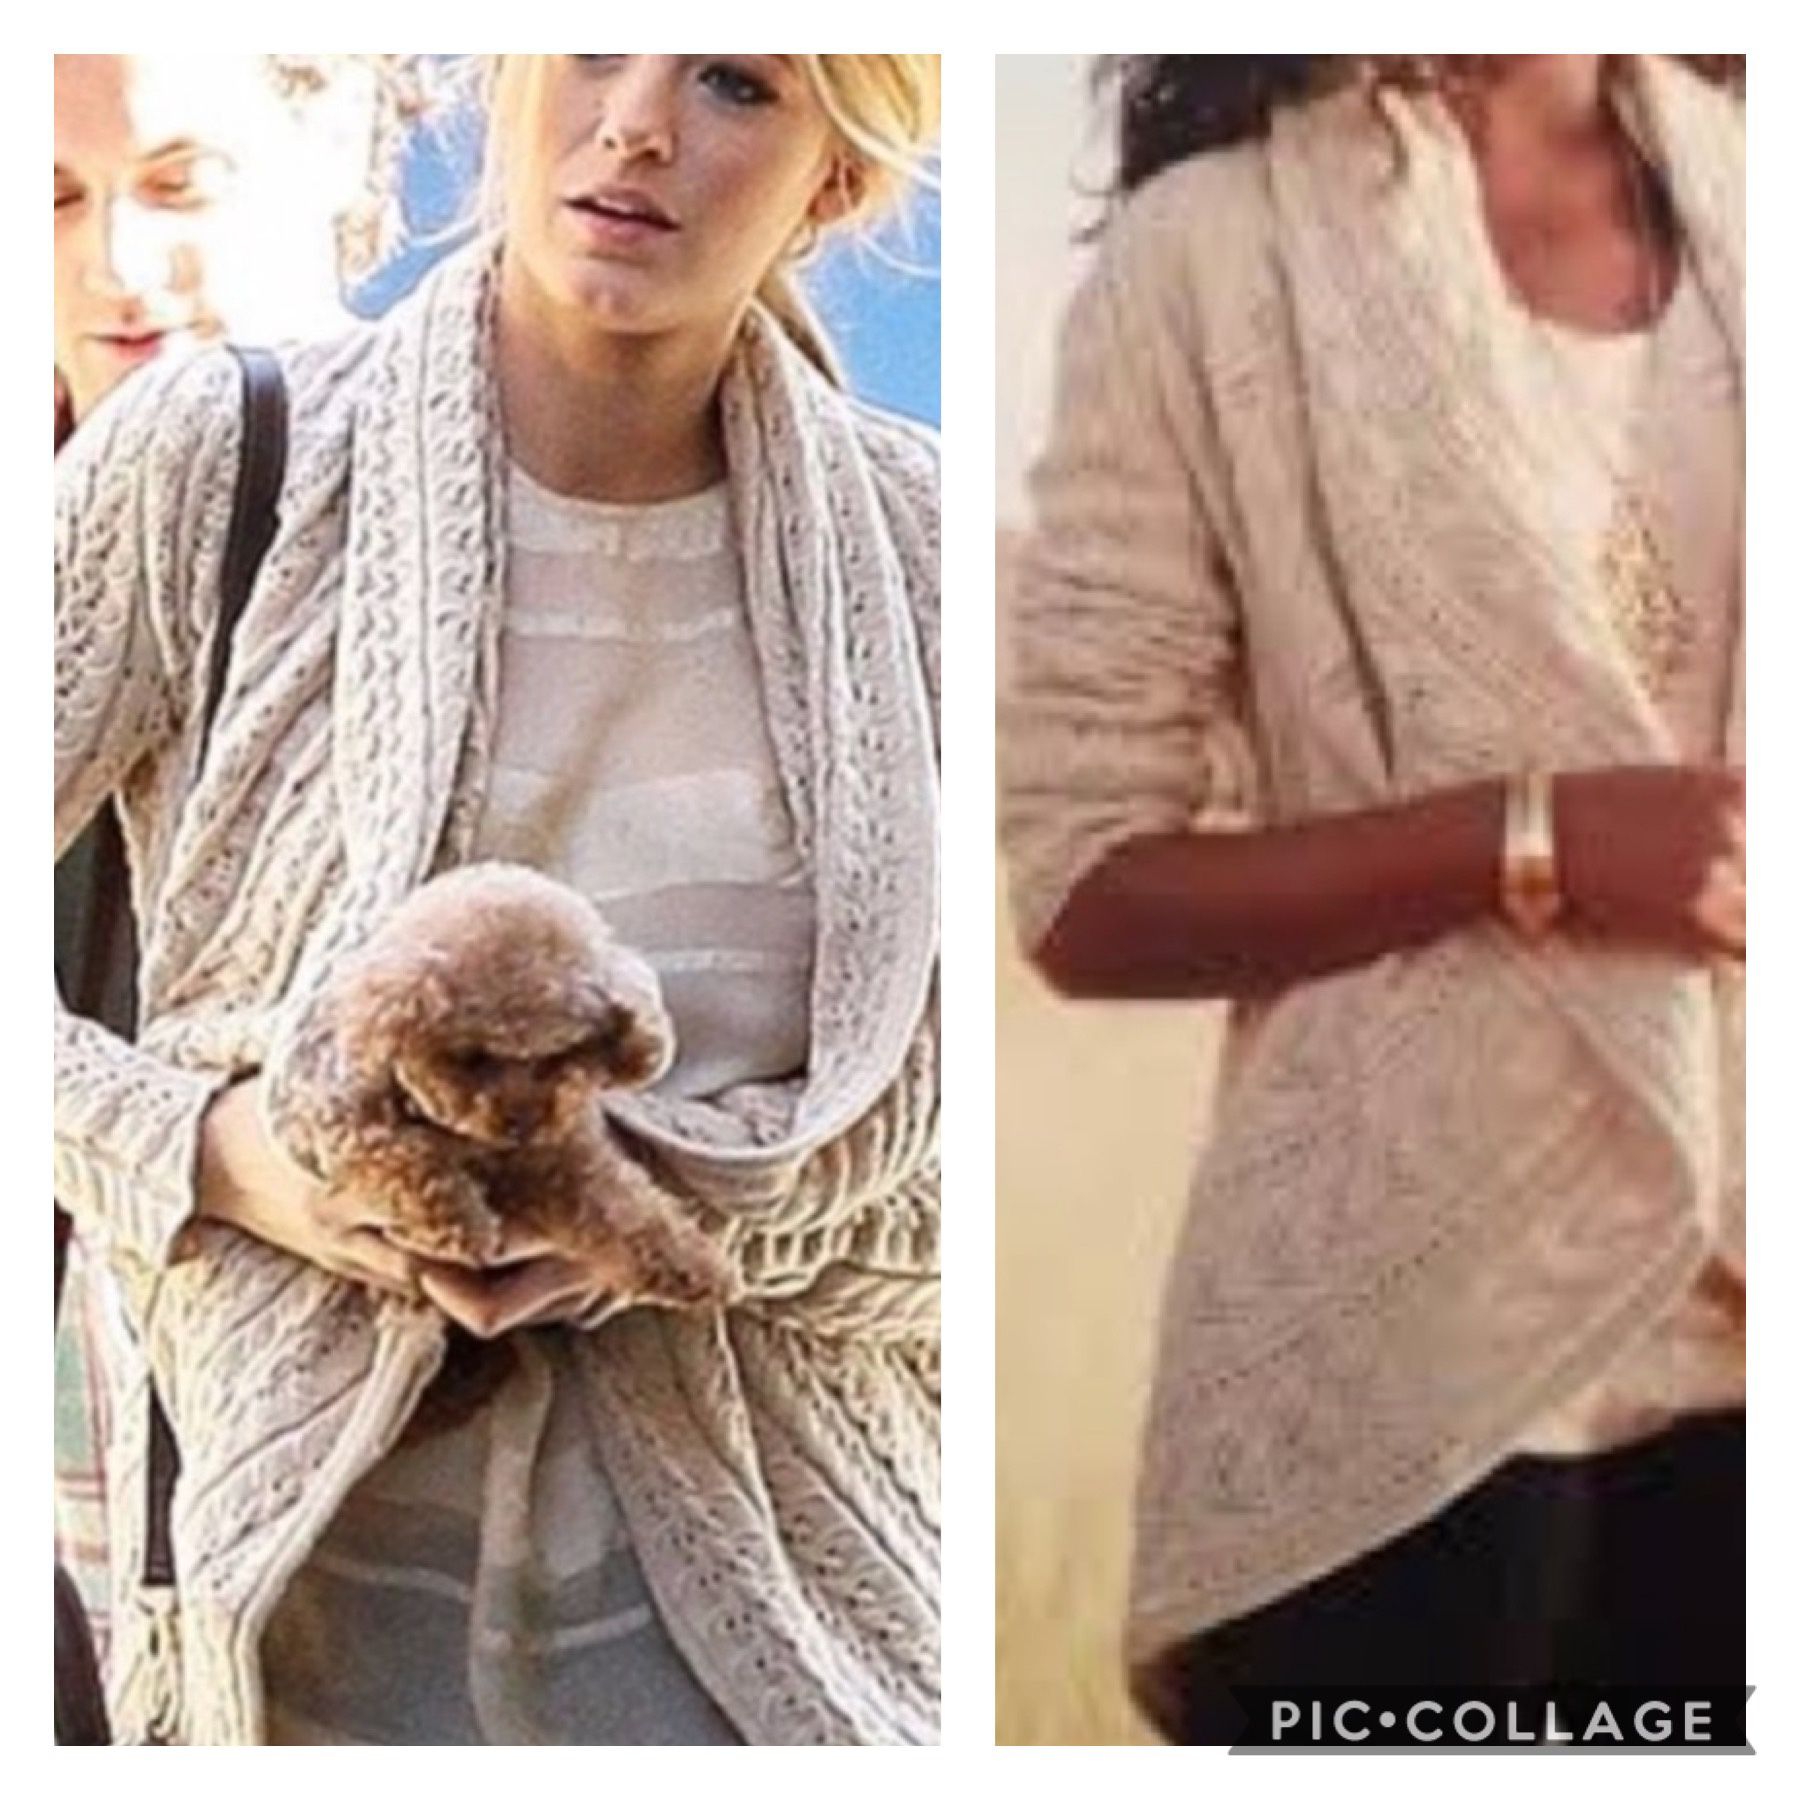 CAbi Circle Sweater Shawl collar crochet cardigan Oatmeal off white/neutral color 20” across underarms 23” shoulder to bottom of sleeve 28” should